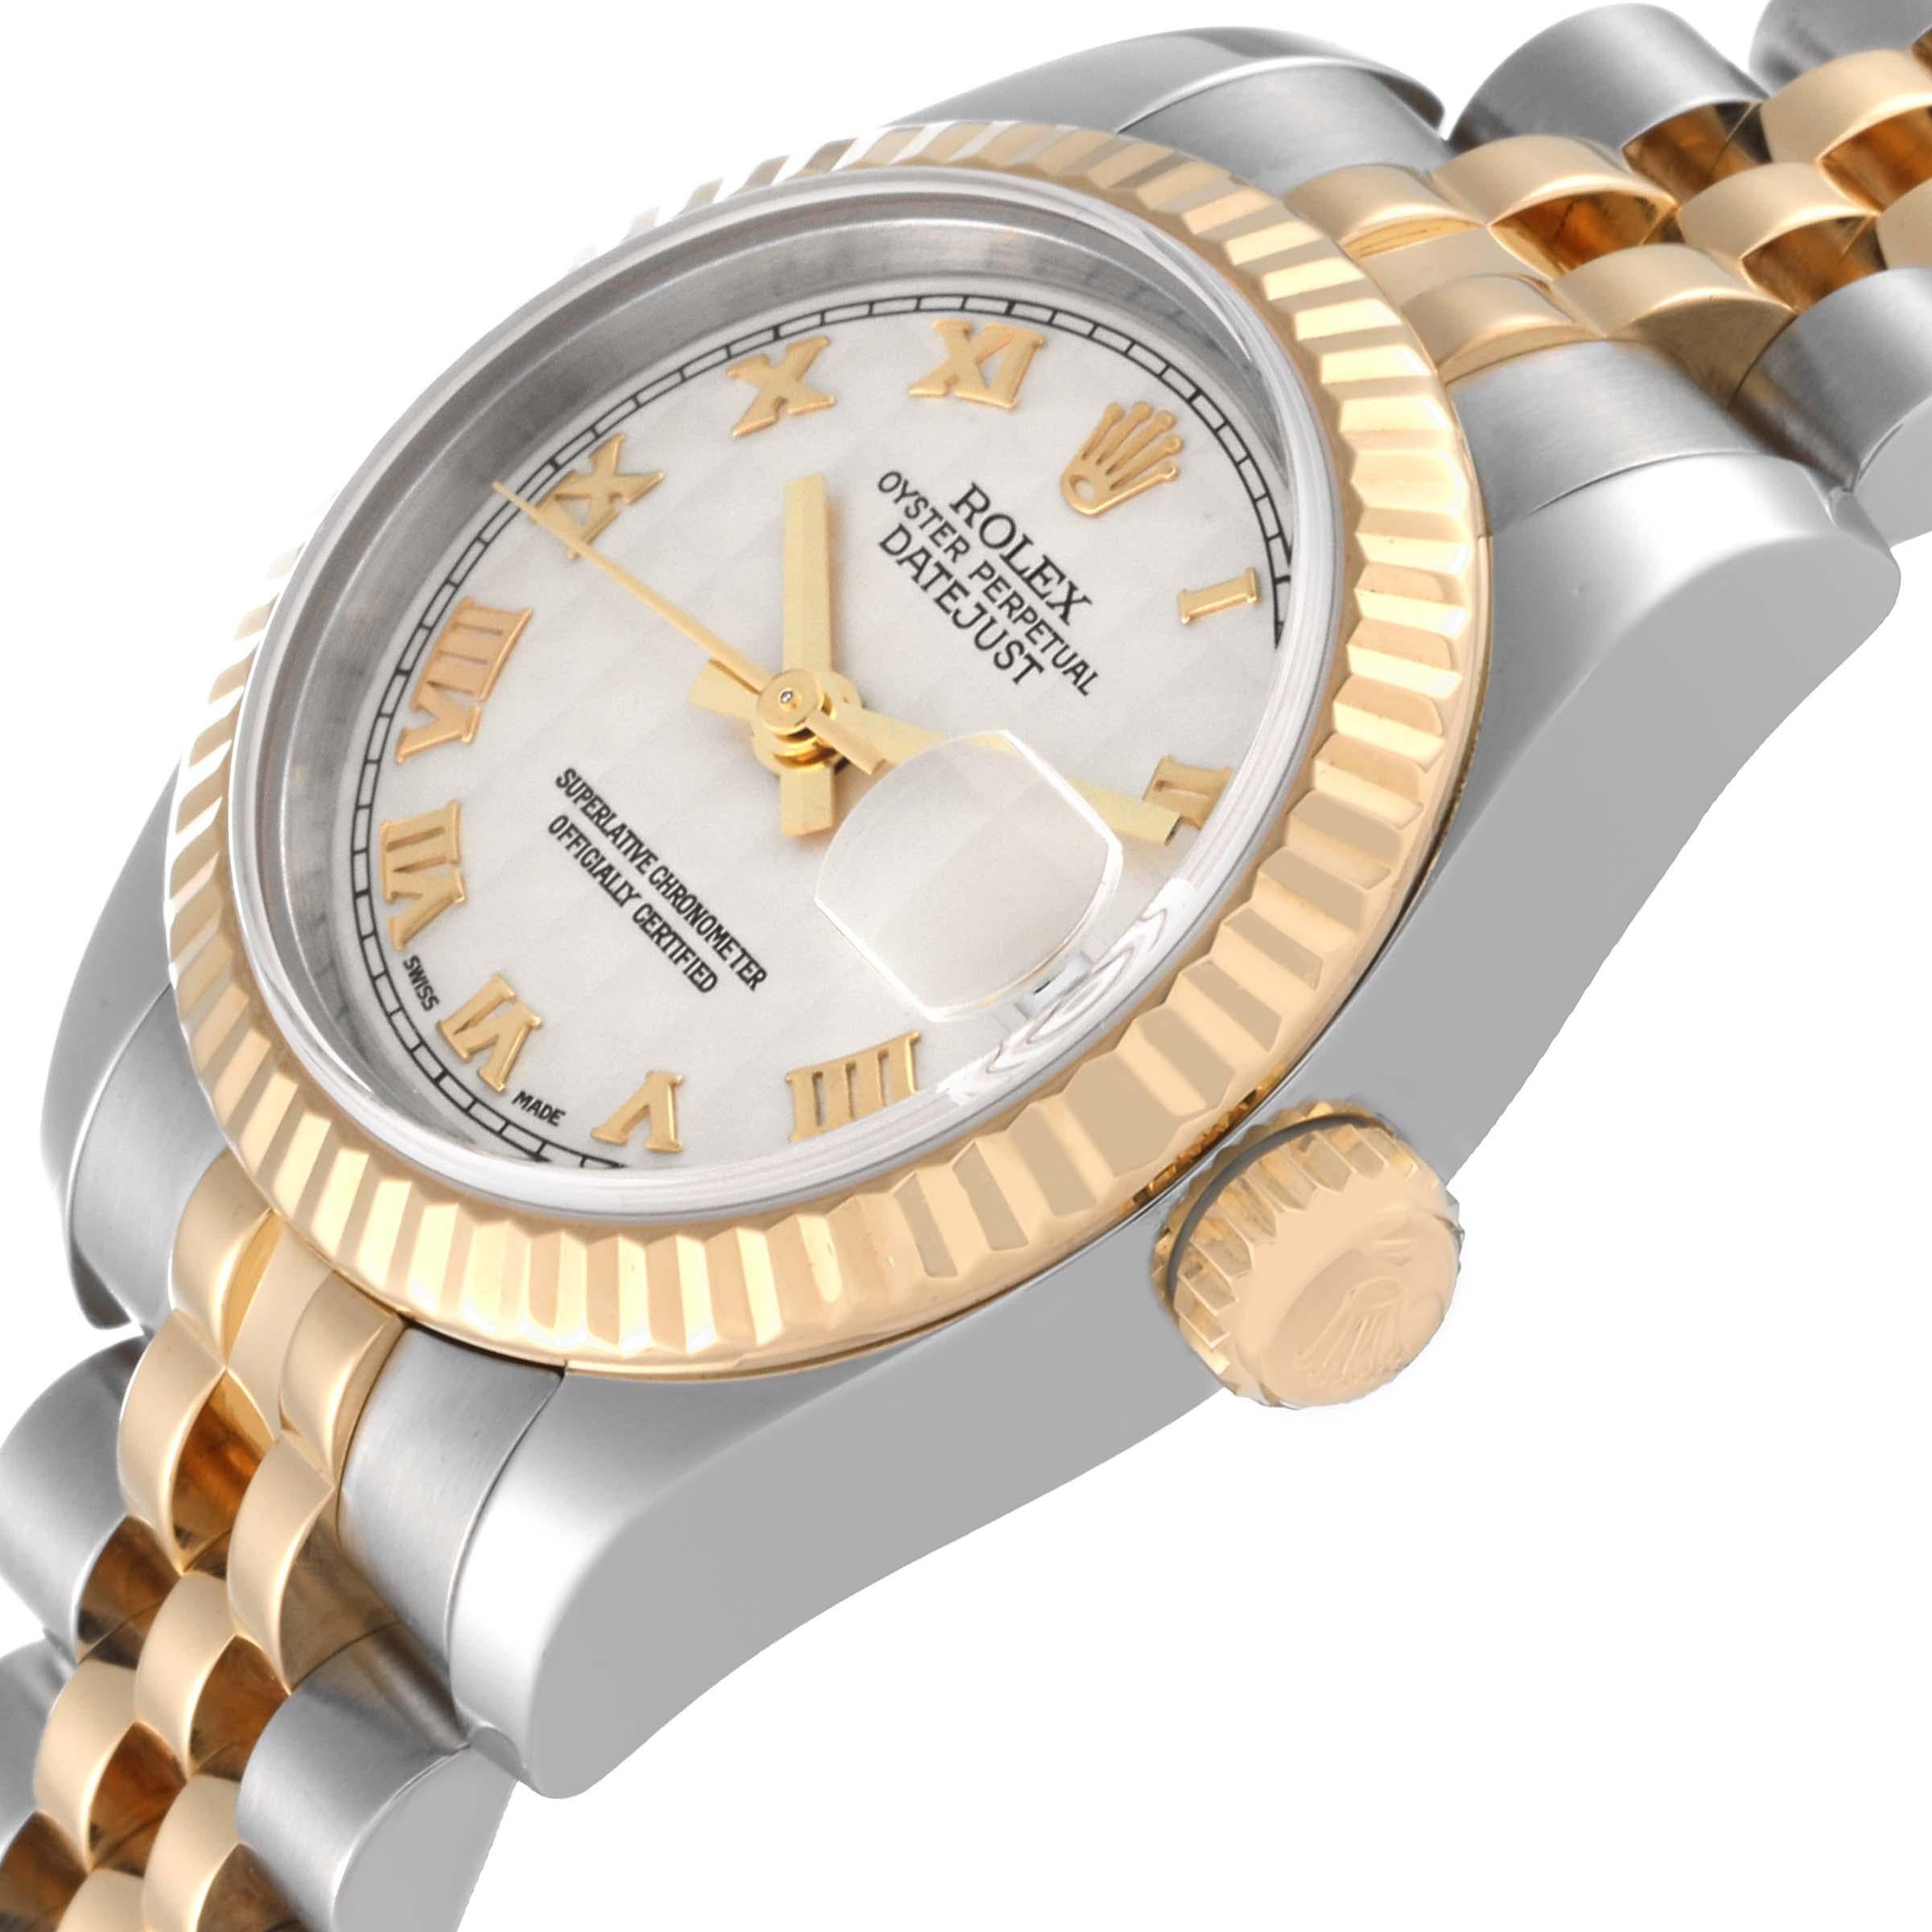 Rolex Datejust Steel Yellow Gold Ivory Pyramid Dial Ladies Watch 179173 For Sale 1